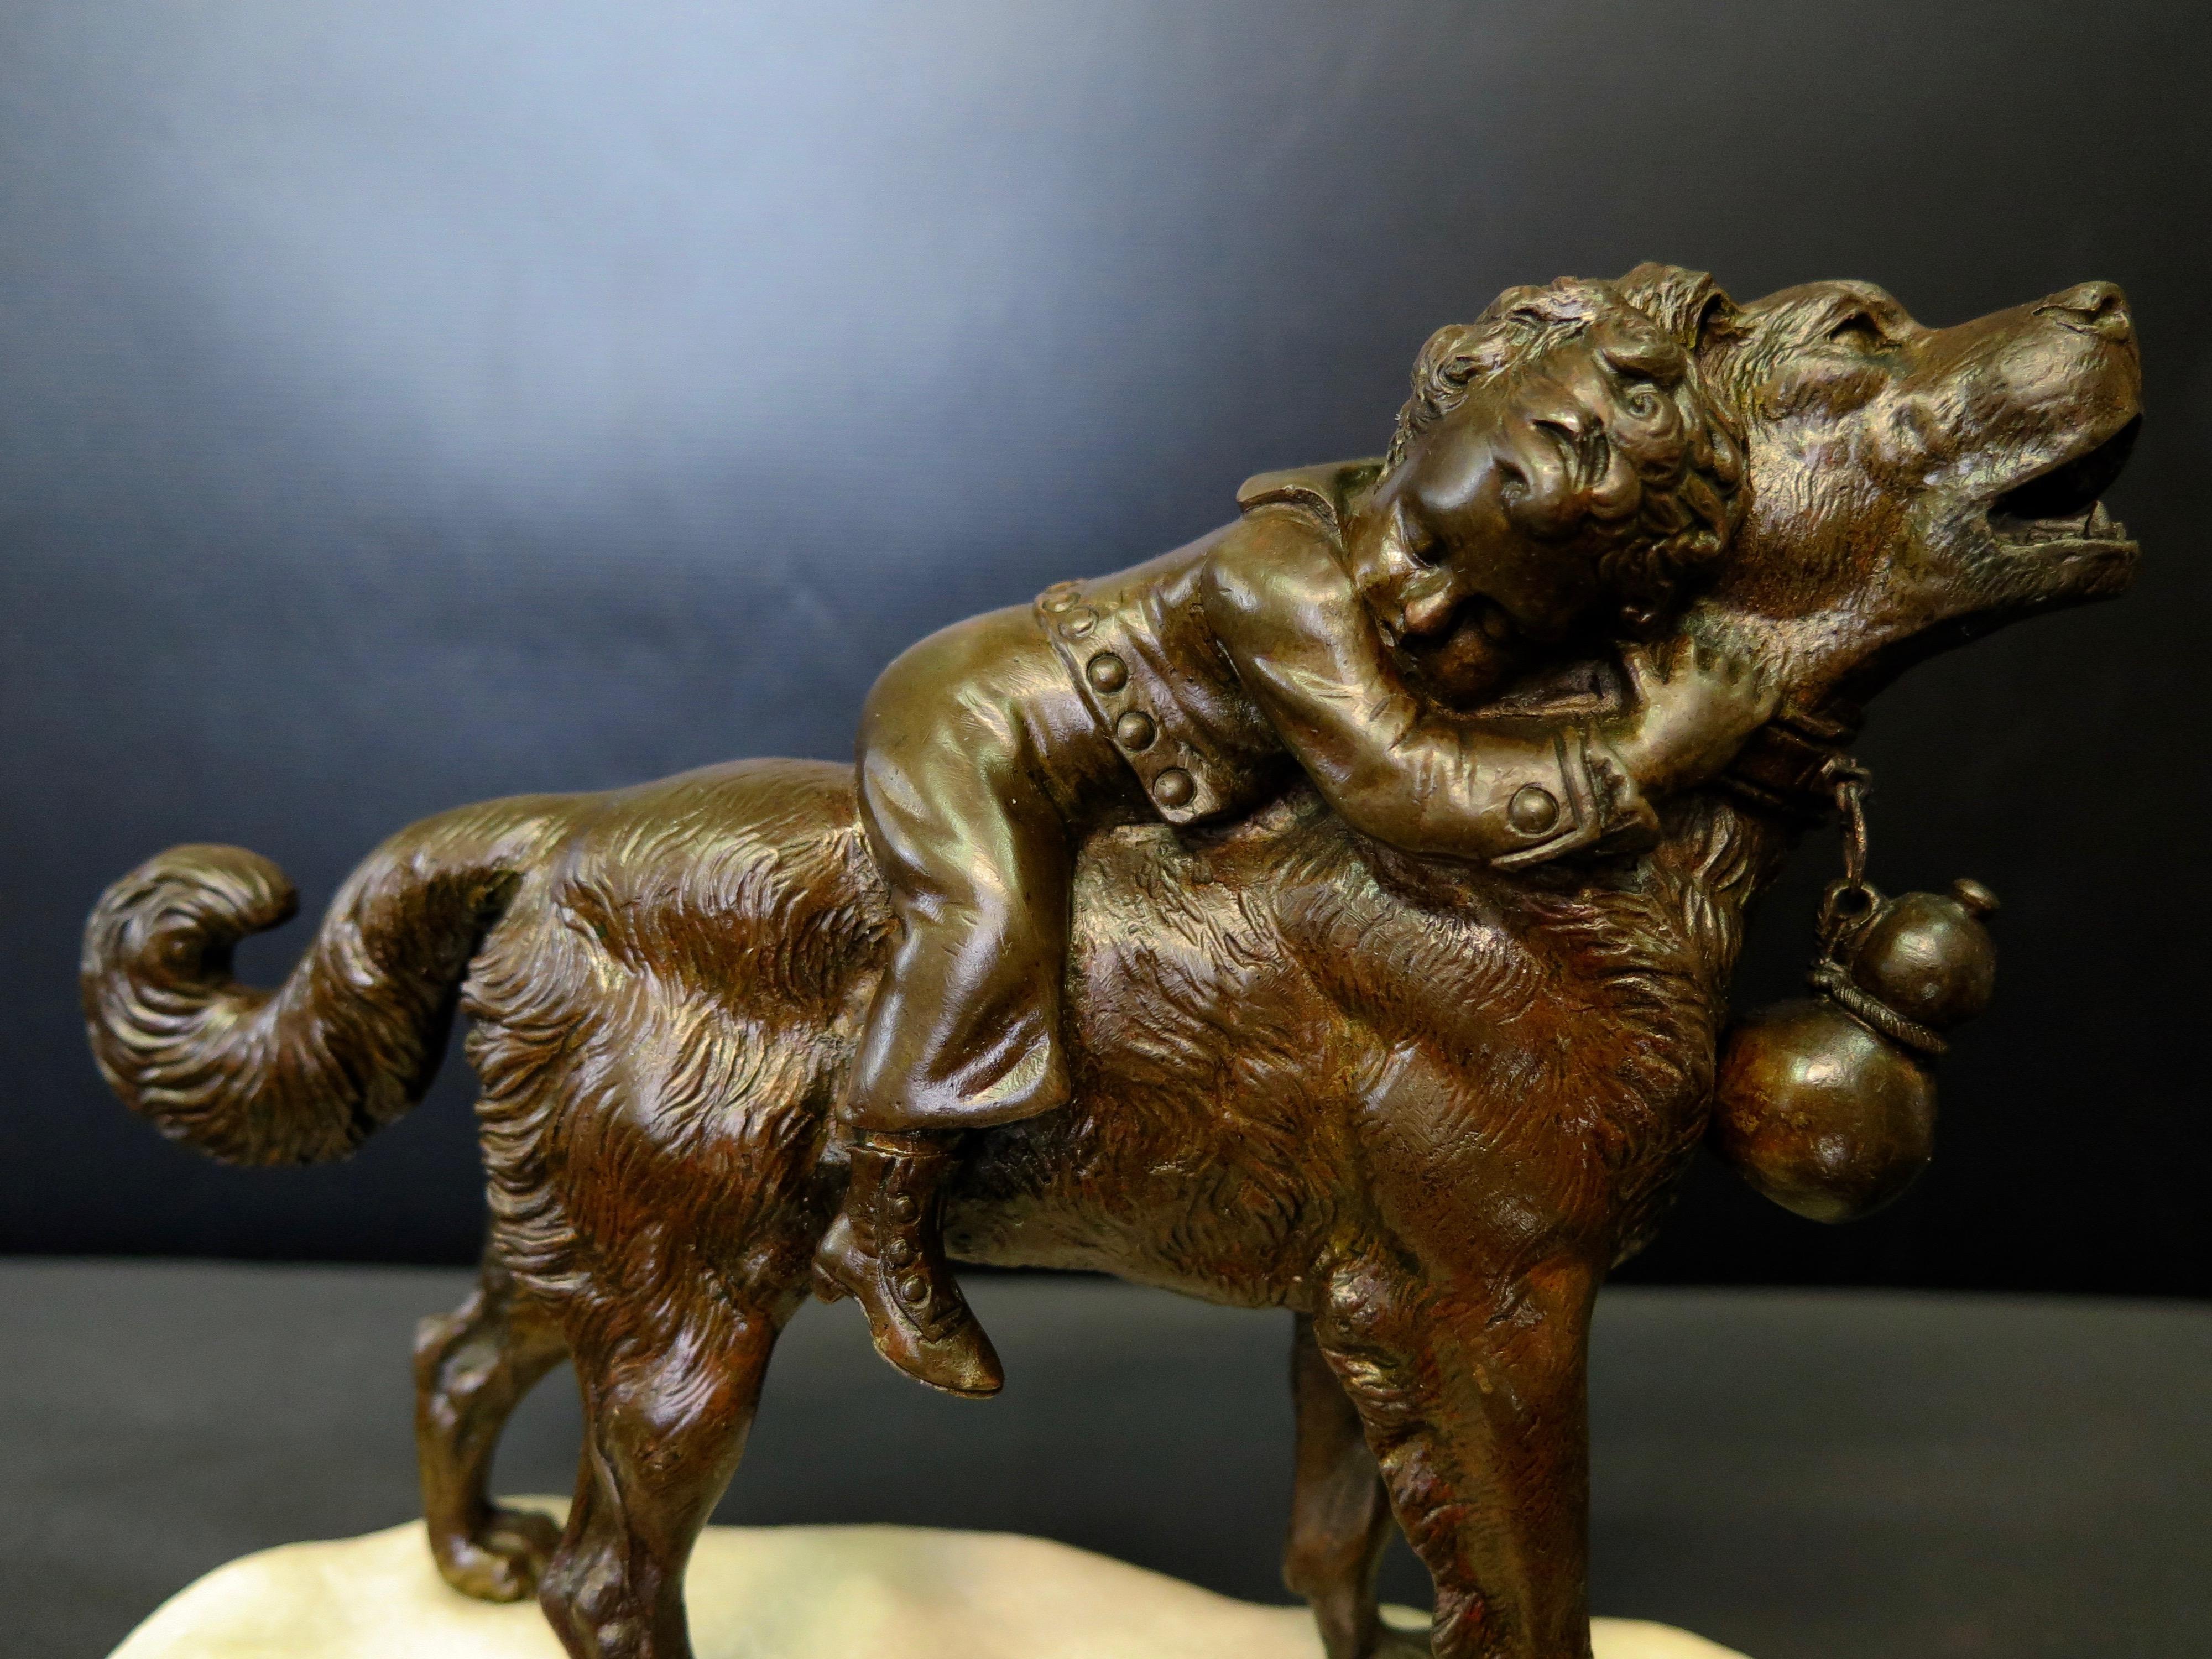 This charming 19th century French bronze sculpture showcases a young lad, safe & secure, with man's (& his) best friend, a dog! The sculptor creates this invitation for all viewers to enjoy this compelling enjoyable scene. Both child & canine are